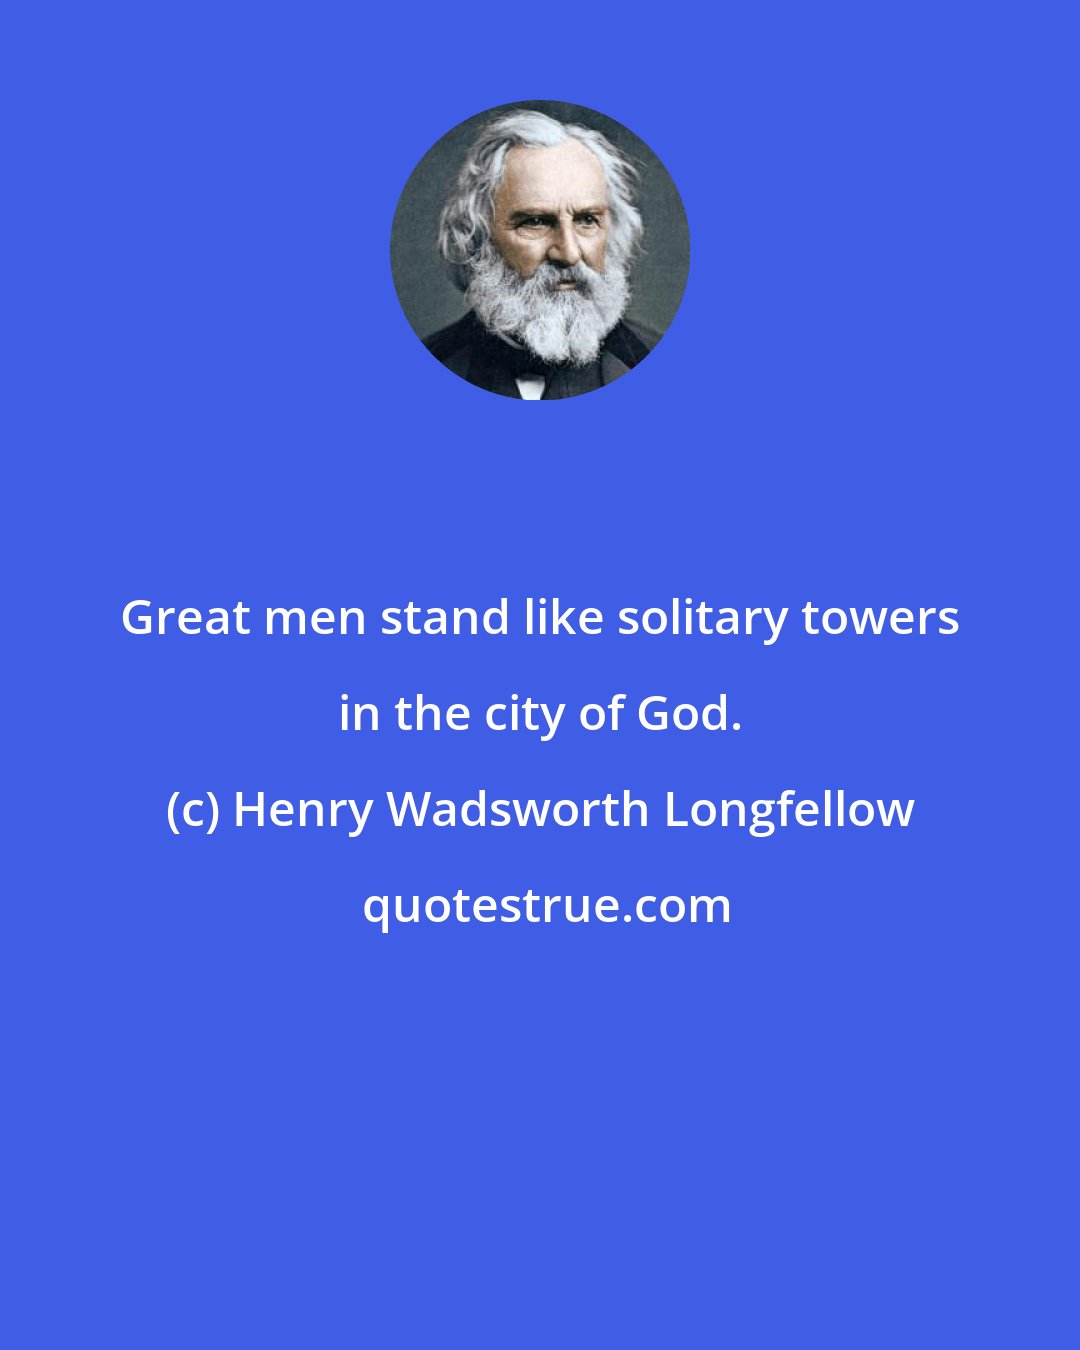 Henry Wadsworth Longfellow: Great men stand like solitary towers in the city of God.